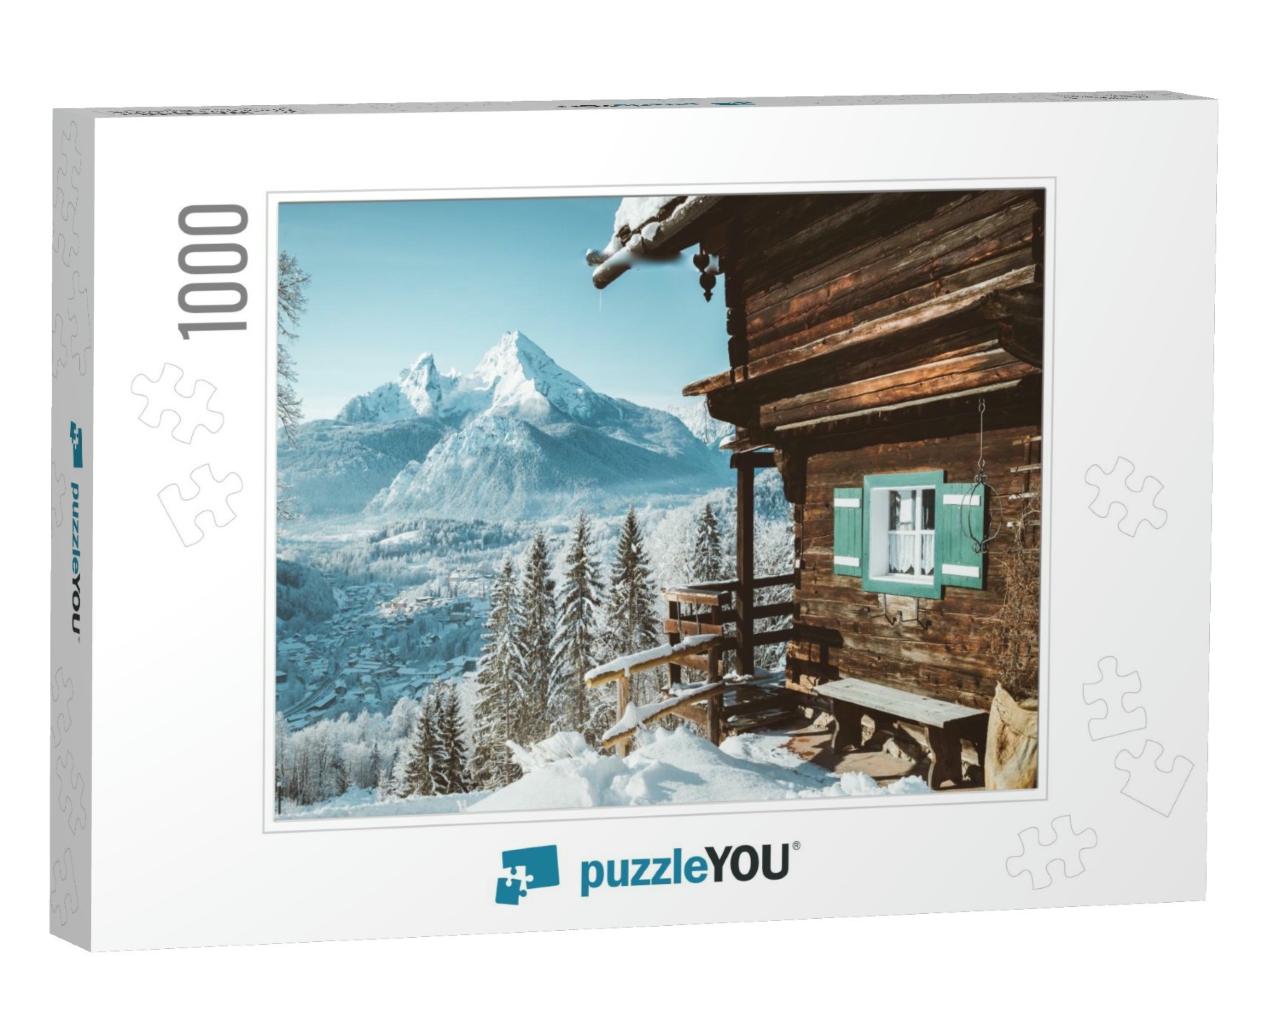 Idyllic View of Traditional Wooden Mountain Cabin in Scen... Jigsaw Puzzle with 1000 pieces